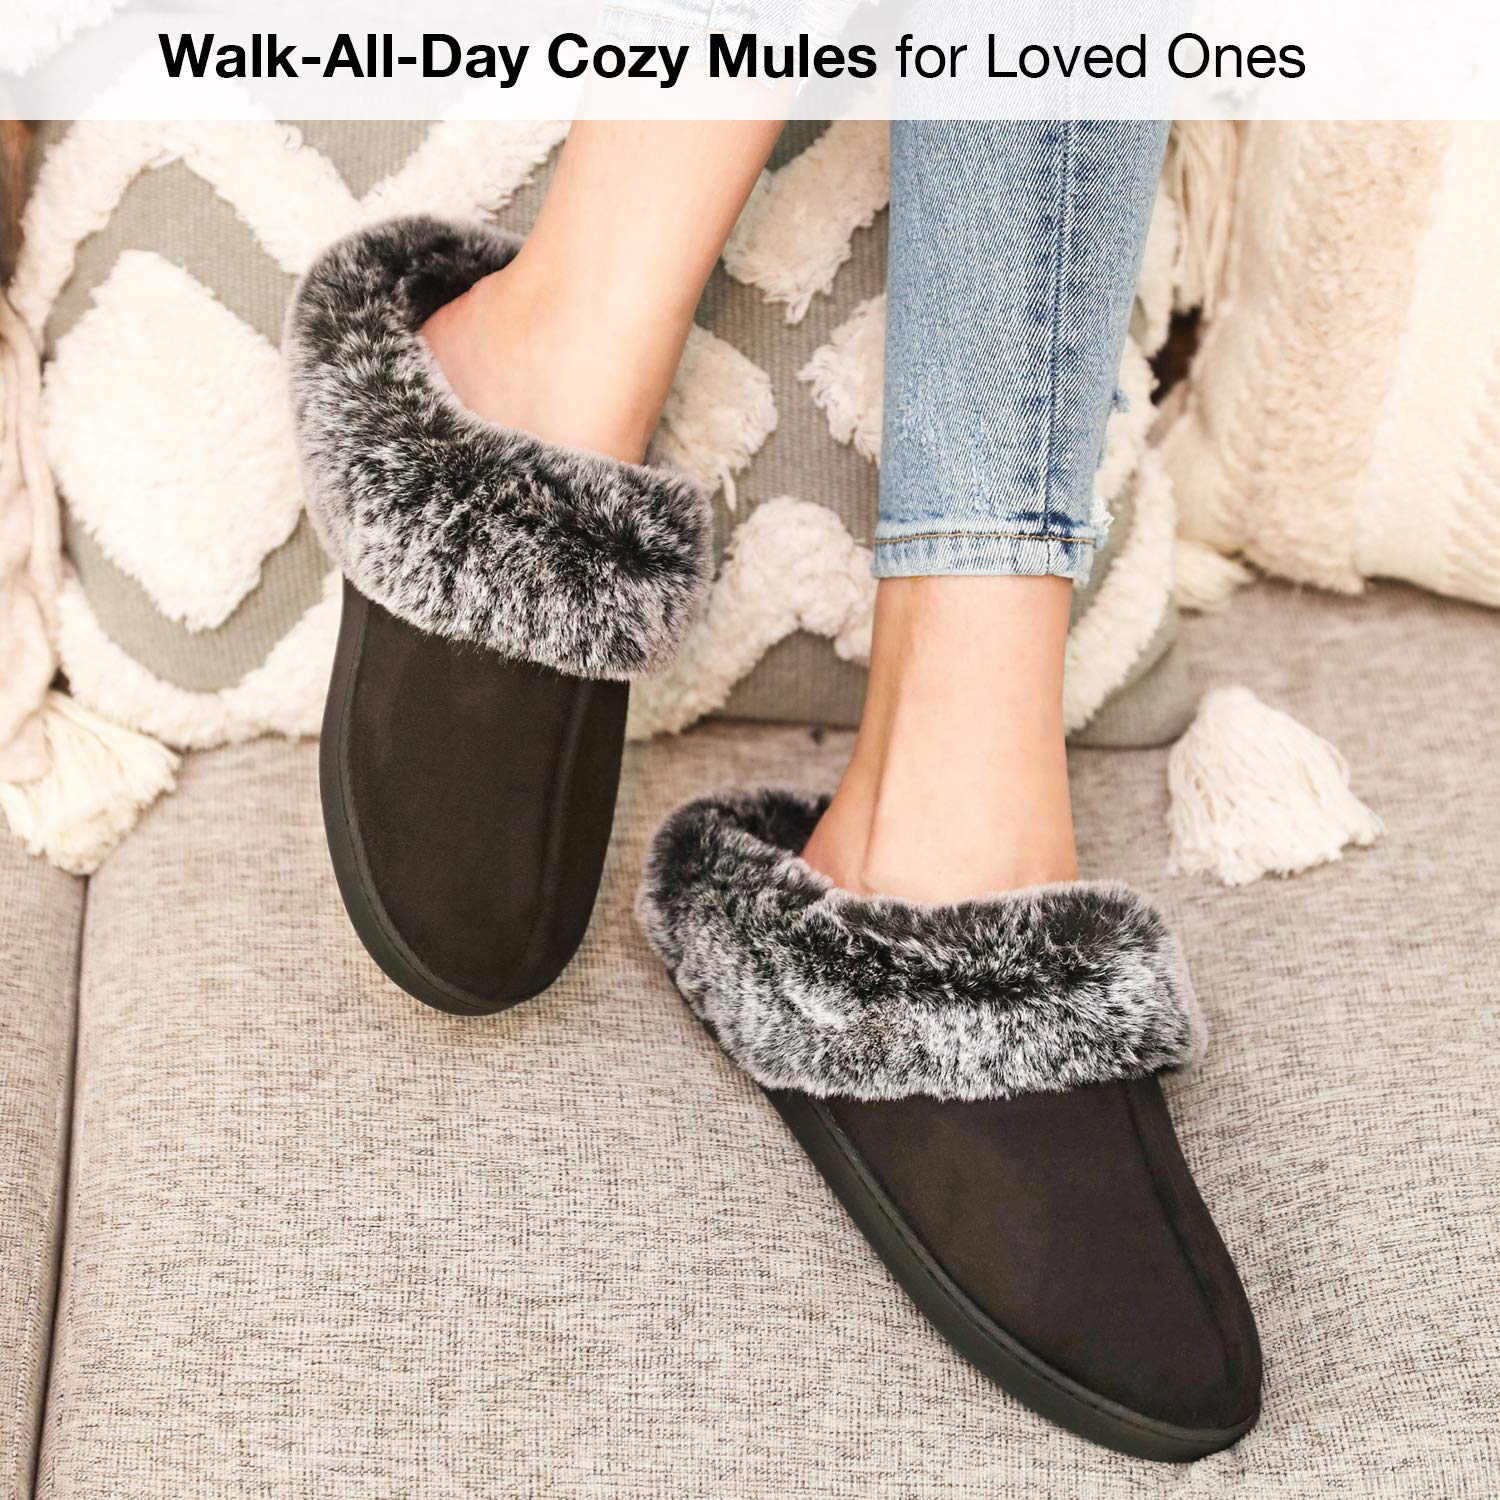 Women's Classic Microsuede Memory Foam Slippers Durable Rubber Sole with Warm Faux Fur Collar